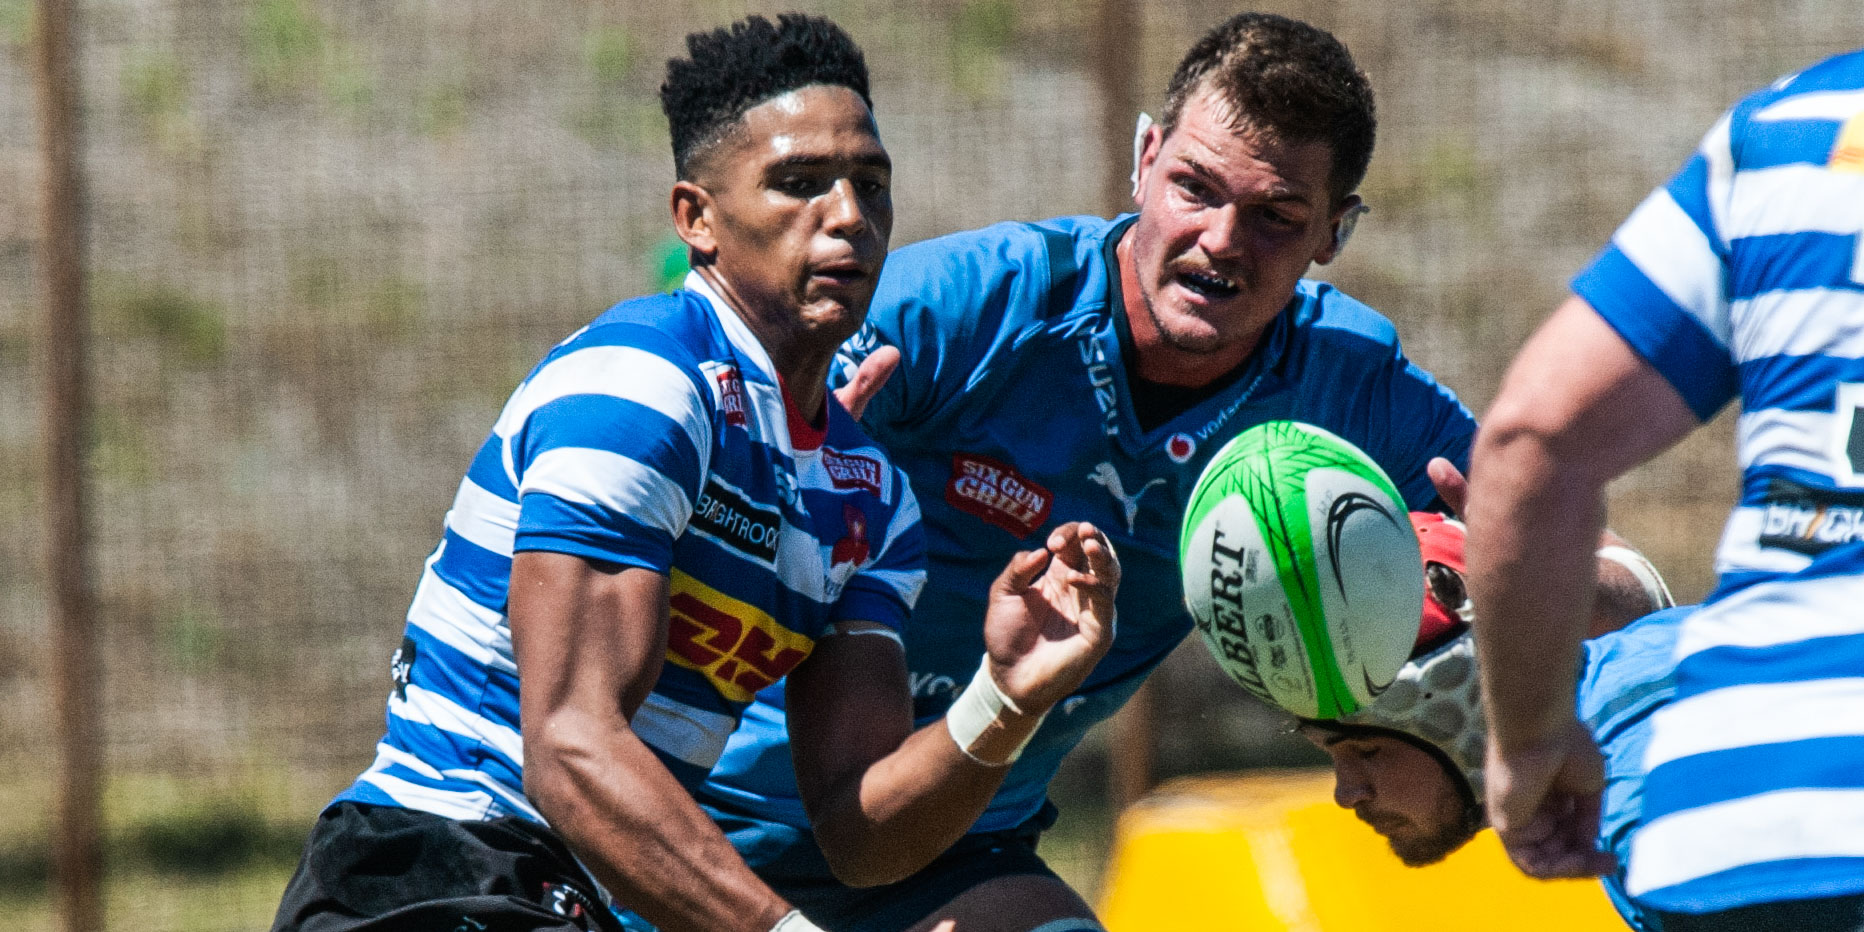 Sacha Mngomezulu in action for the WP U20 team earlier this year.